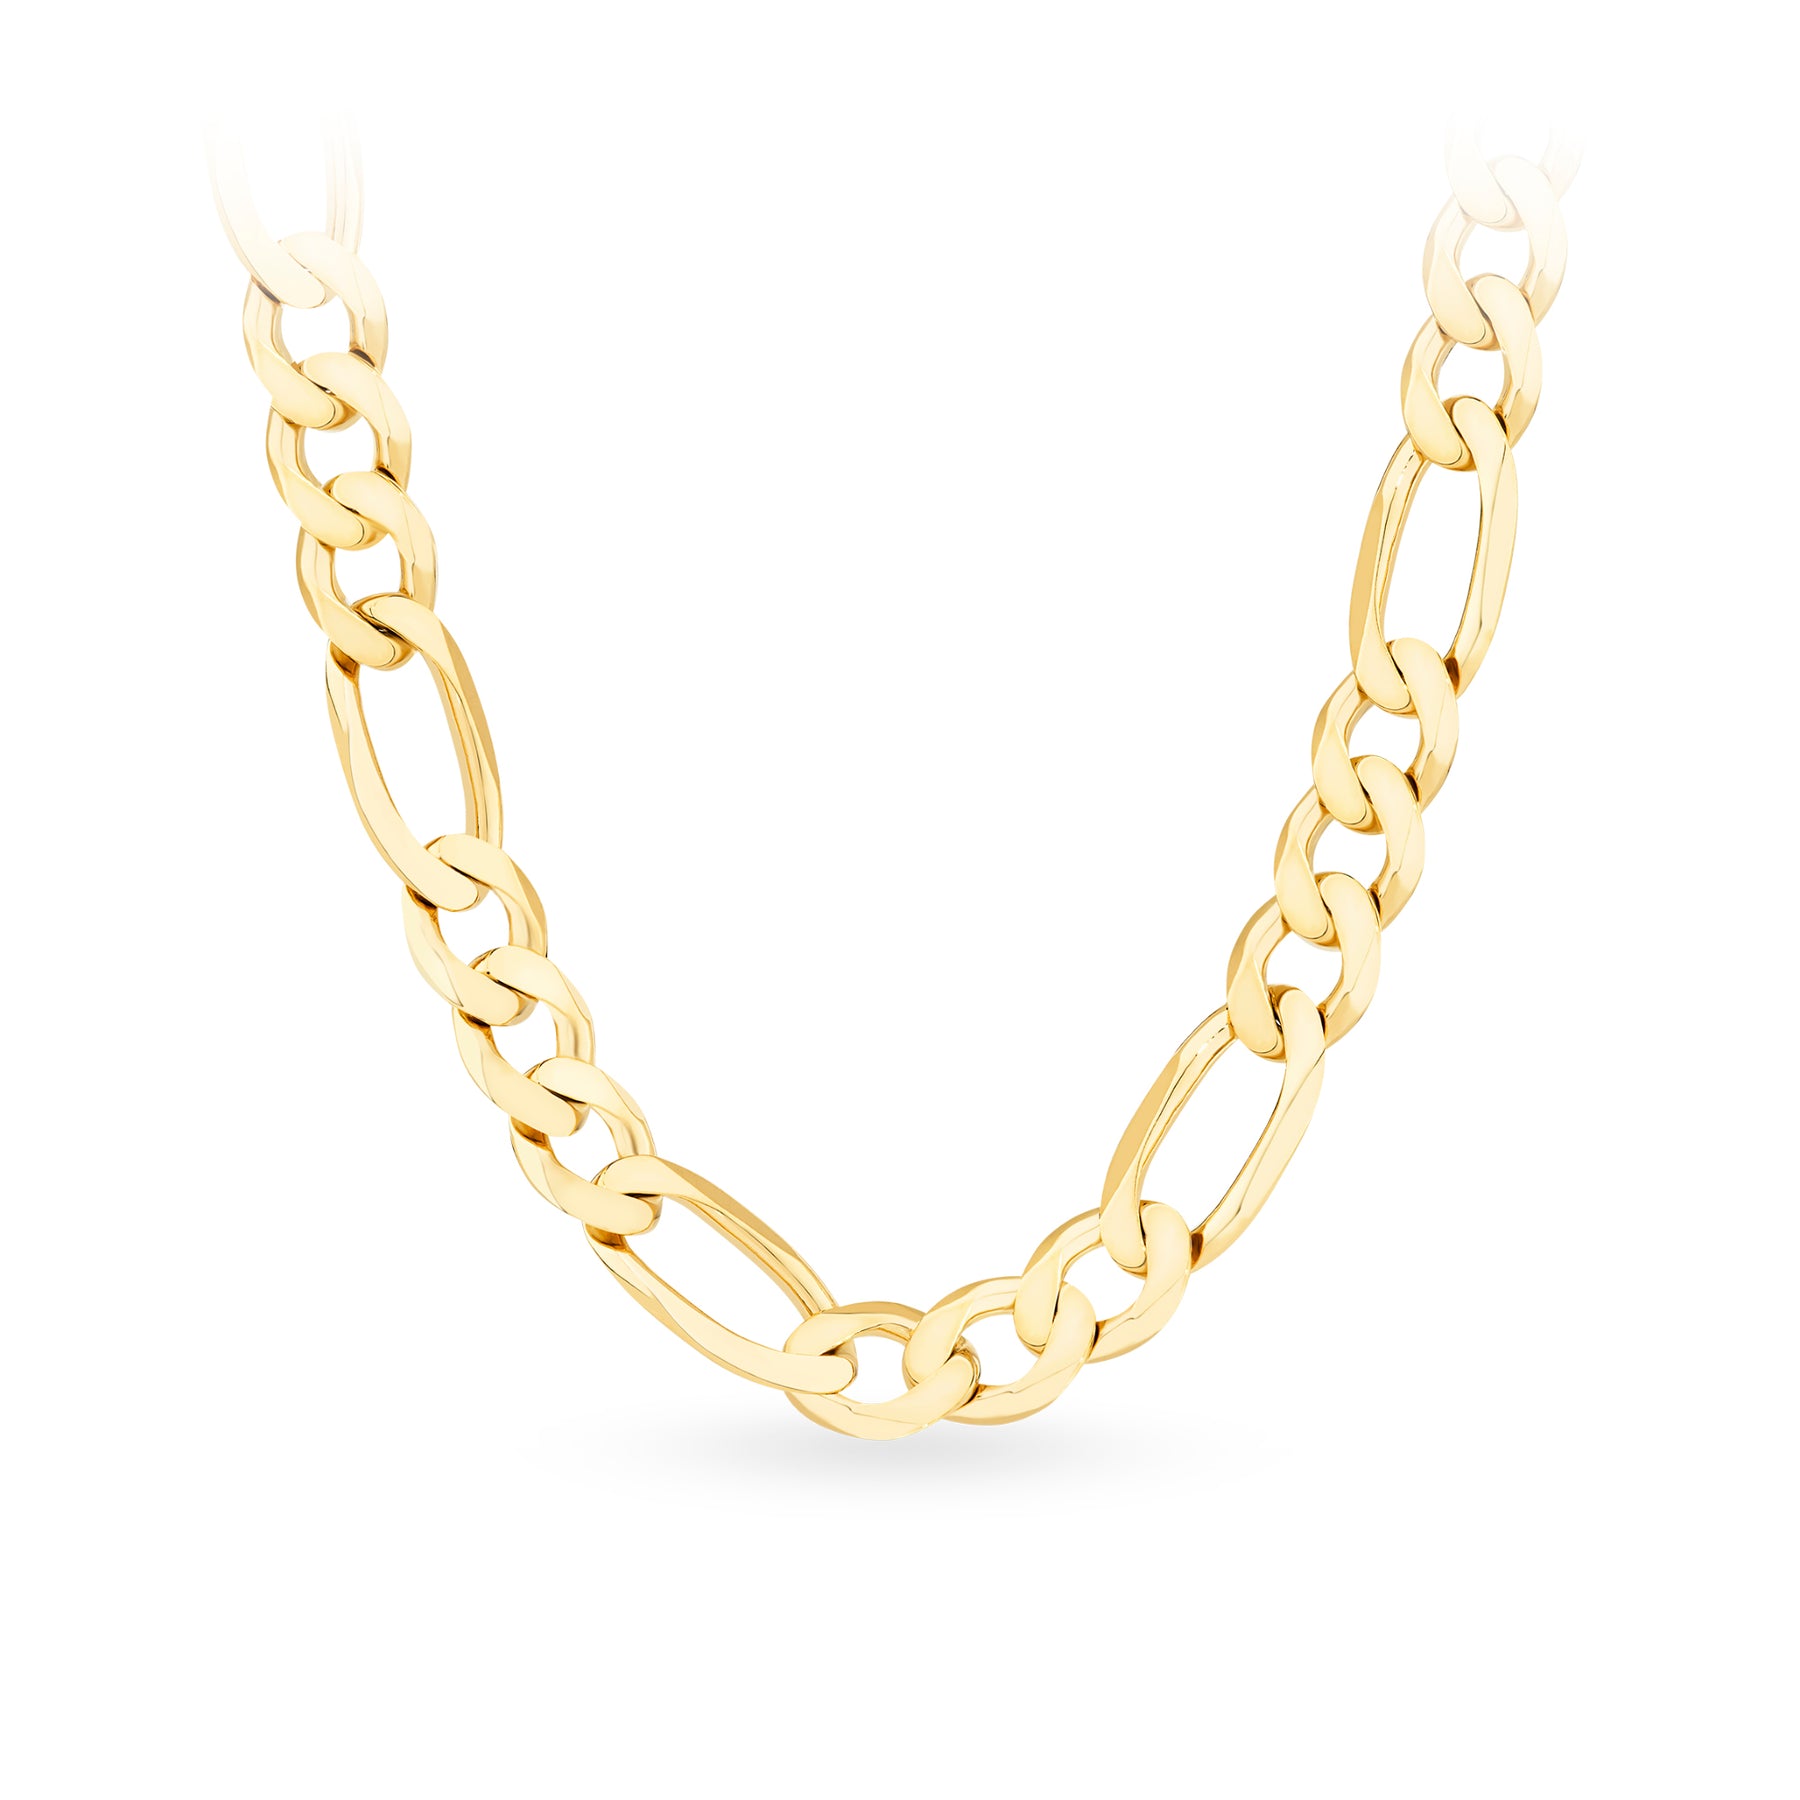 55cm Figaro Chain in 9ct Yellow Gold